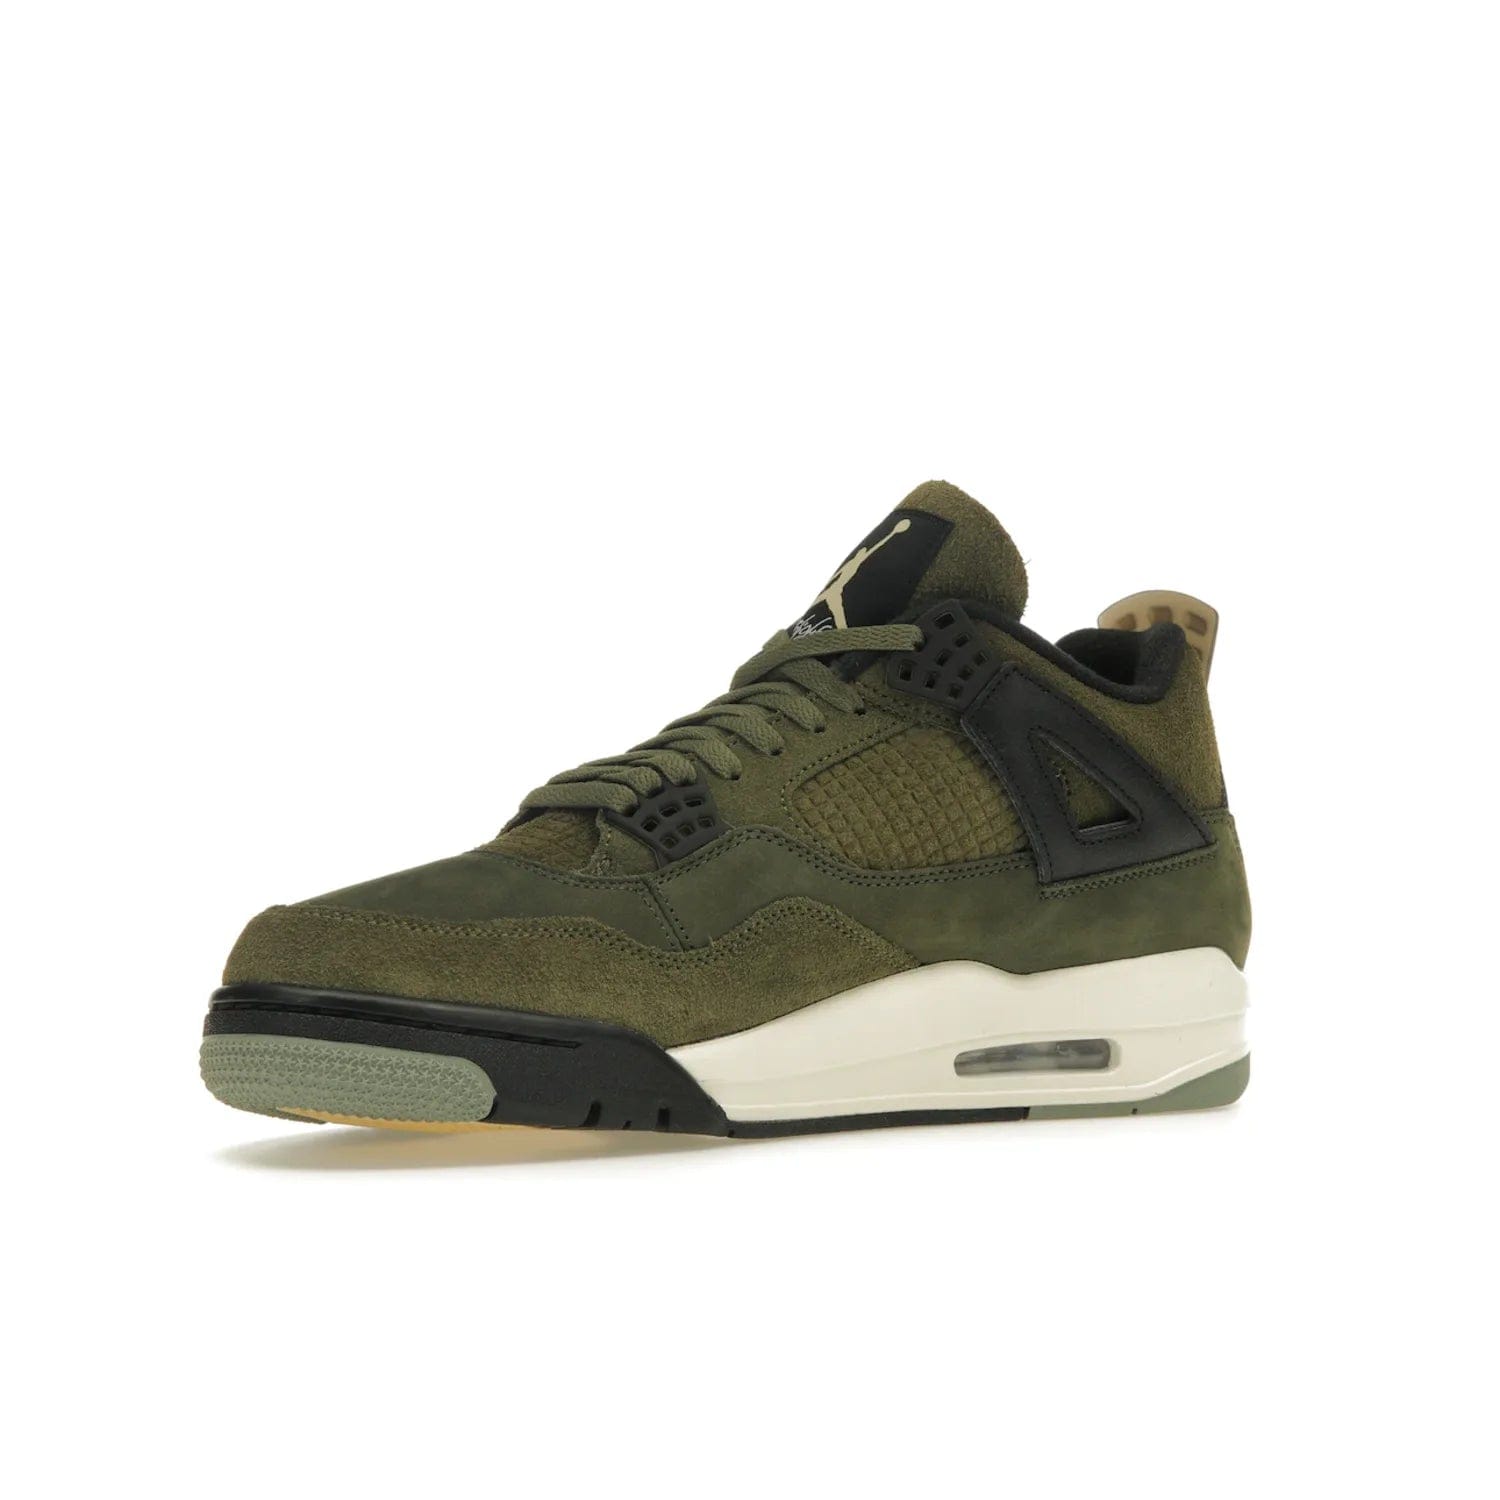 Jordan 4 Retro SE Craft Medium Olive - Image 16 - Only at www.BallersClubKickz.com - Grab the Jordan 4 Retro SE Crafts for a unique style. Combines Medium Olive, Pale Vanilla, Khaki, Black and Sail, with same classic shape, cushioning, and rubber outsole. Available on November 18th!